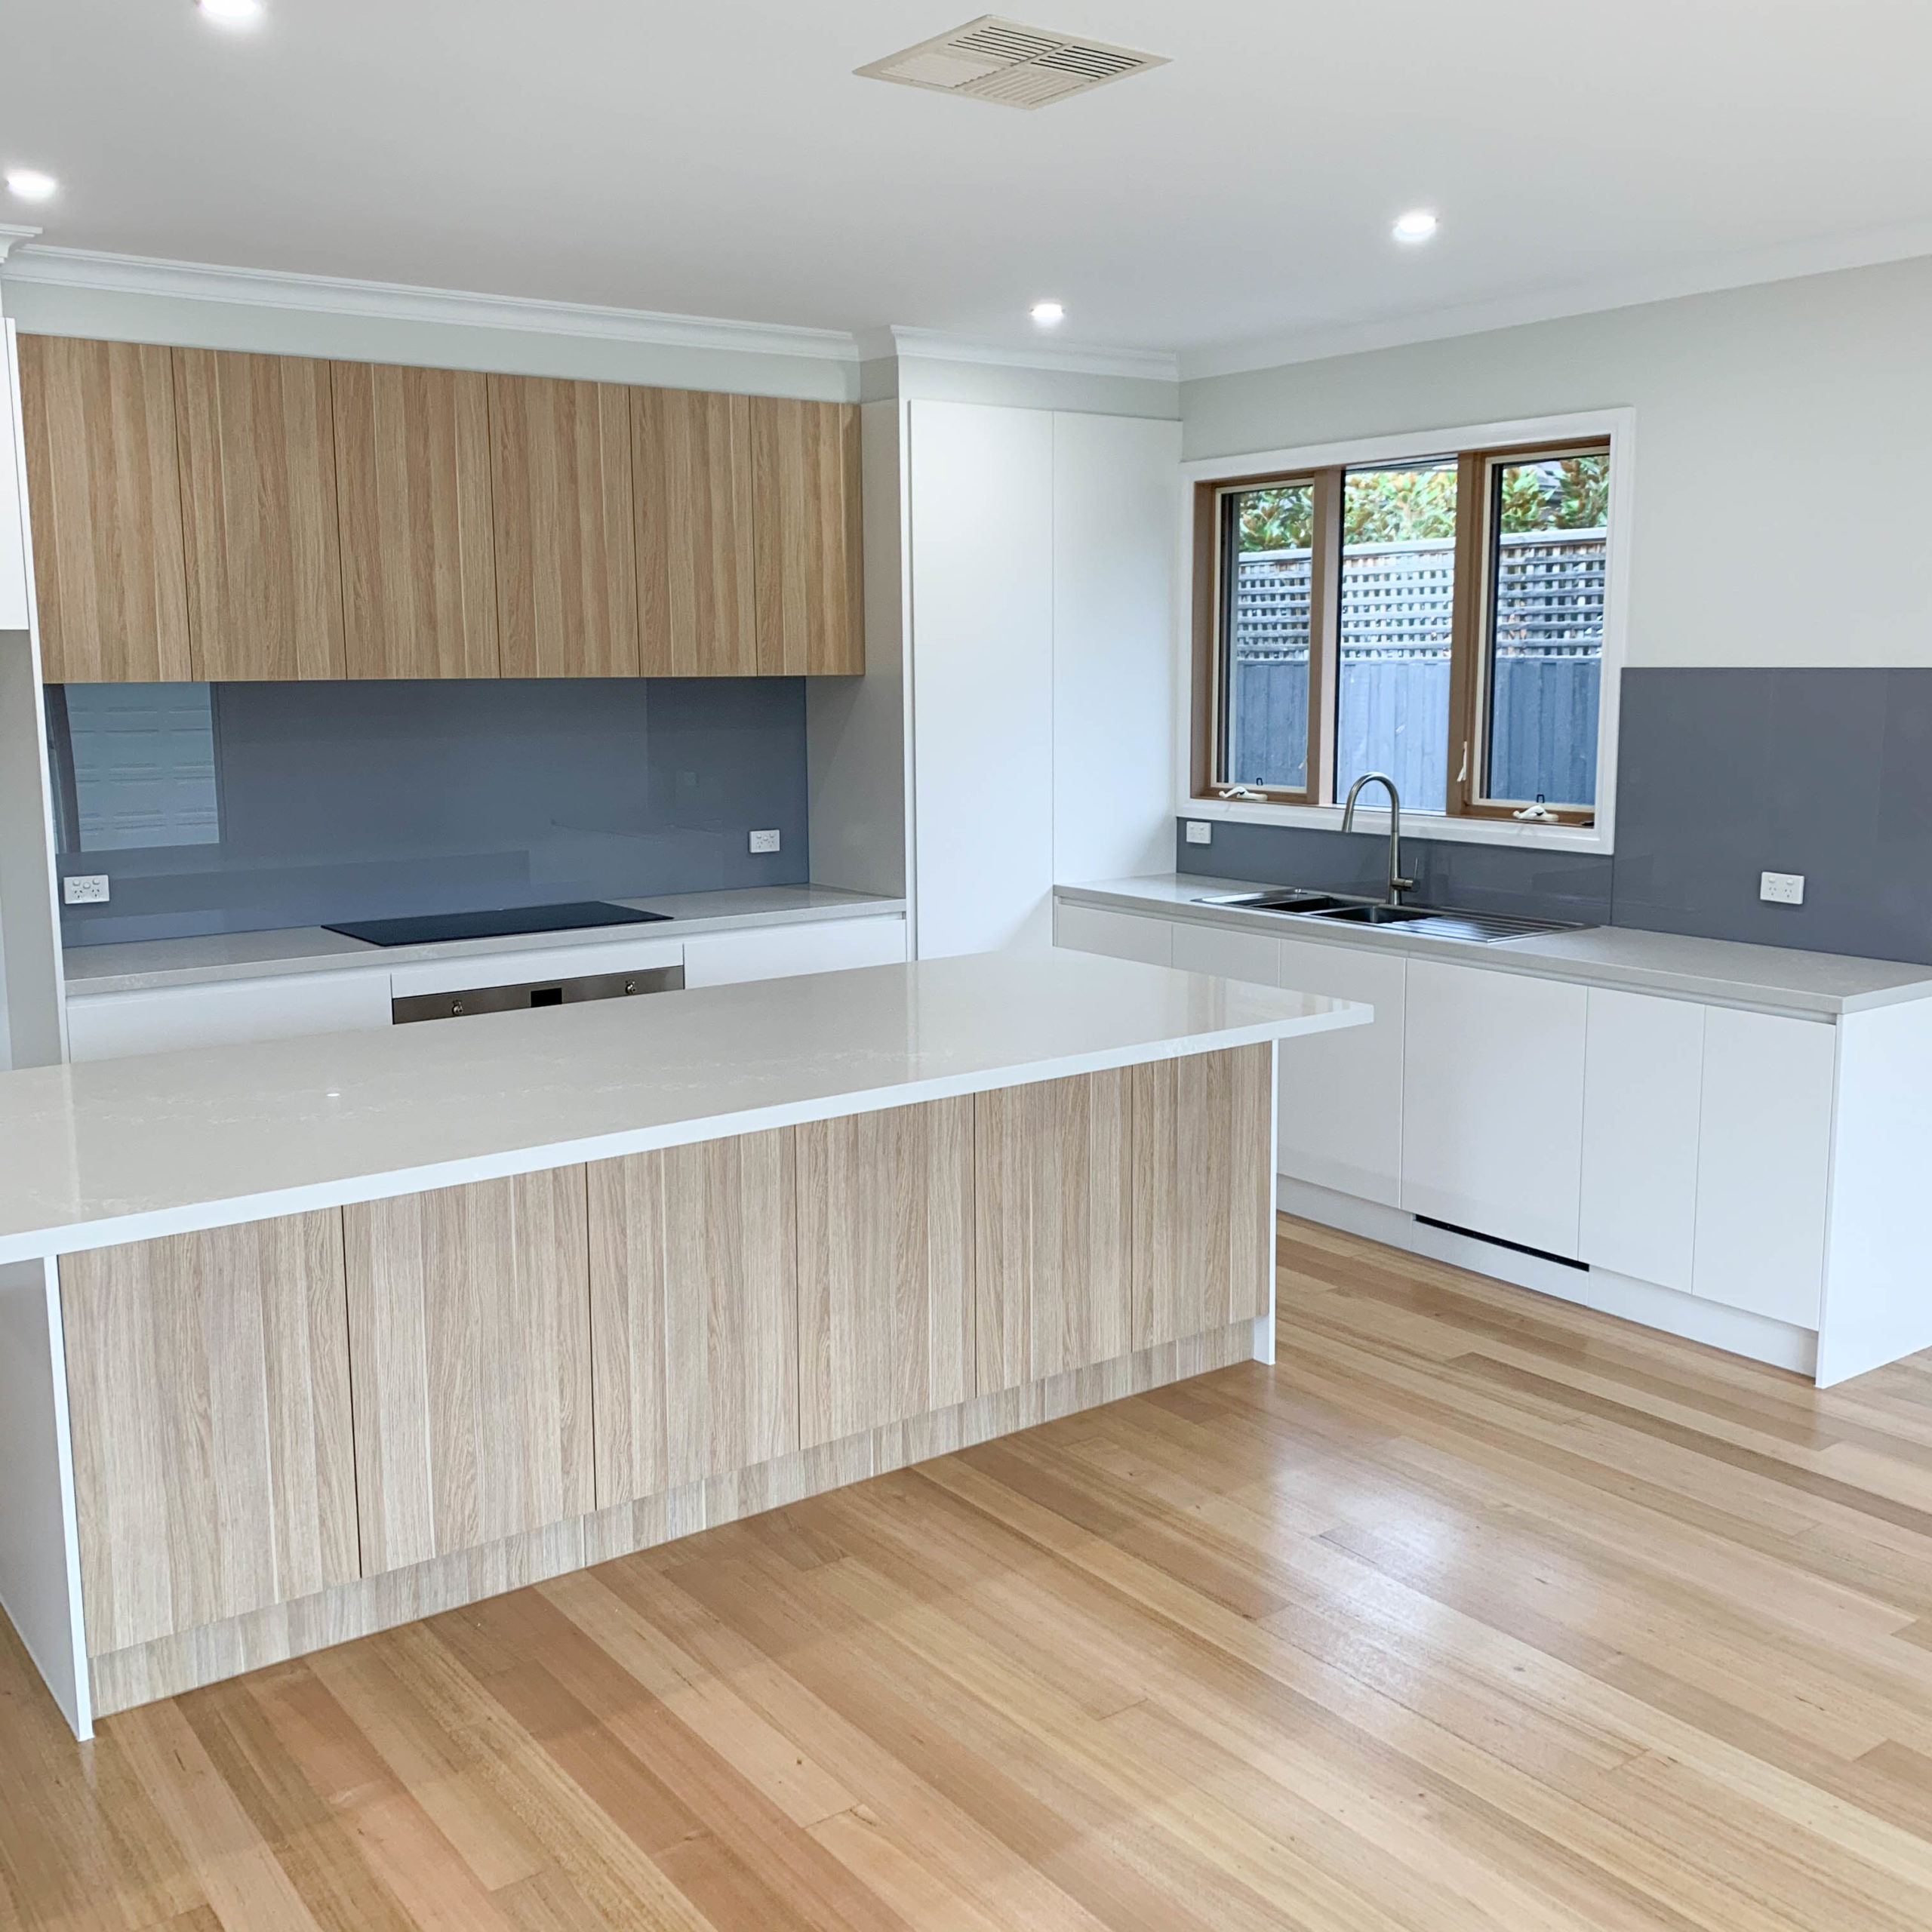 Kitchen Gallery   Melbourne Kitchens and Bathrooms   Renovation ...